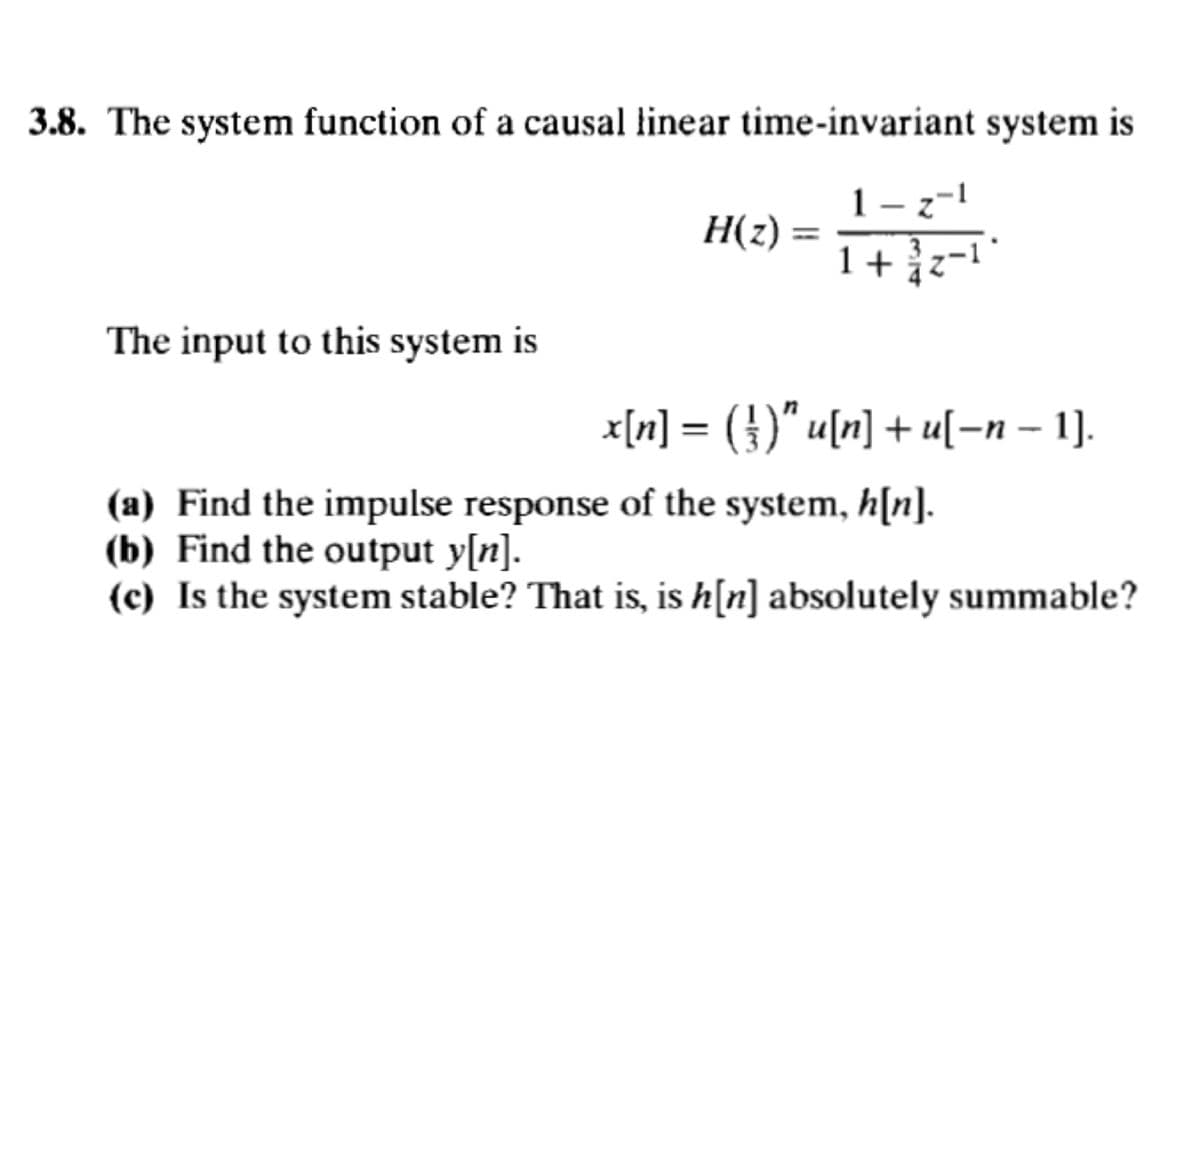 3.8. The system function of a causal linear time-invariant system is
H(z) =
1-z-1
1+/-1*
The input to this system is
x[n] = (})″ u[n] + u[−n − 1].
-
(a) Find the impulse response of the system, h[n].
(b) Find the output y[n].
(c) Is the system stable? That is, is h[n] absolutely summable?